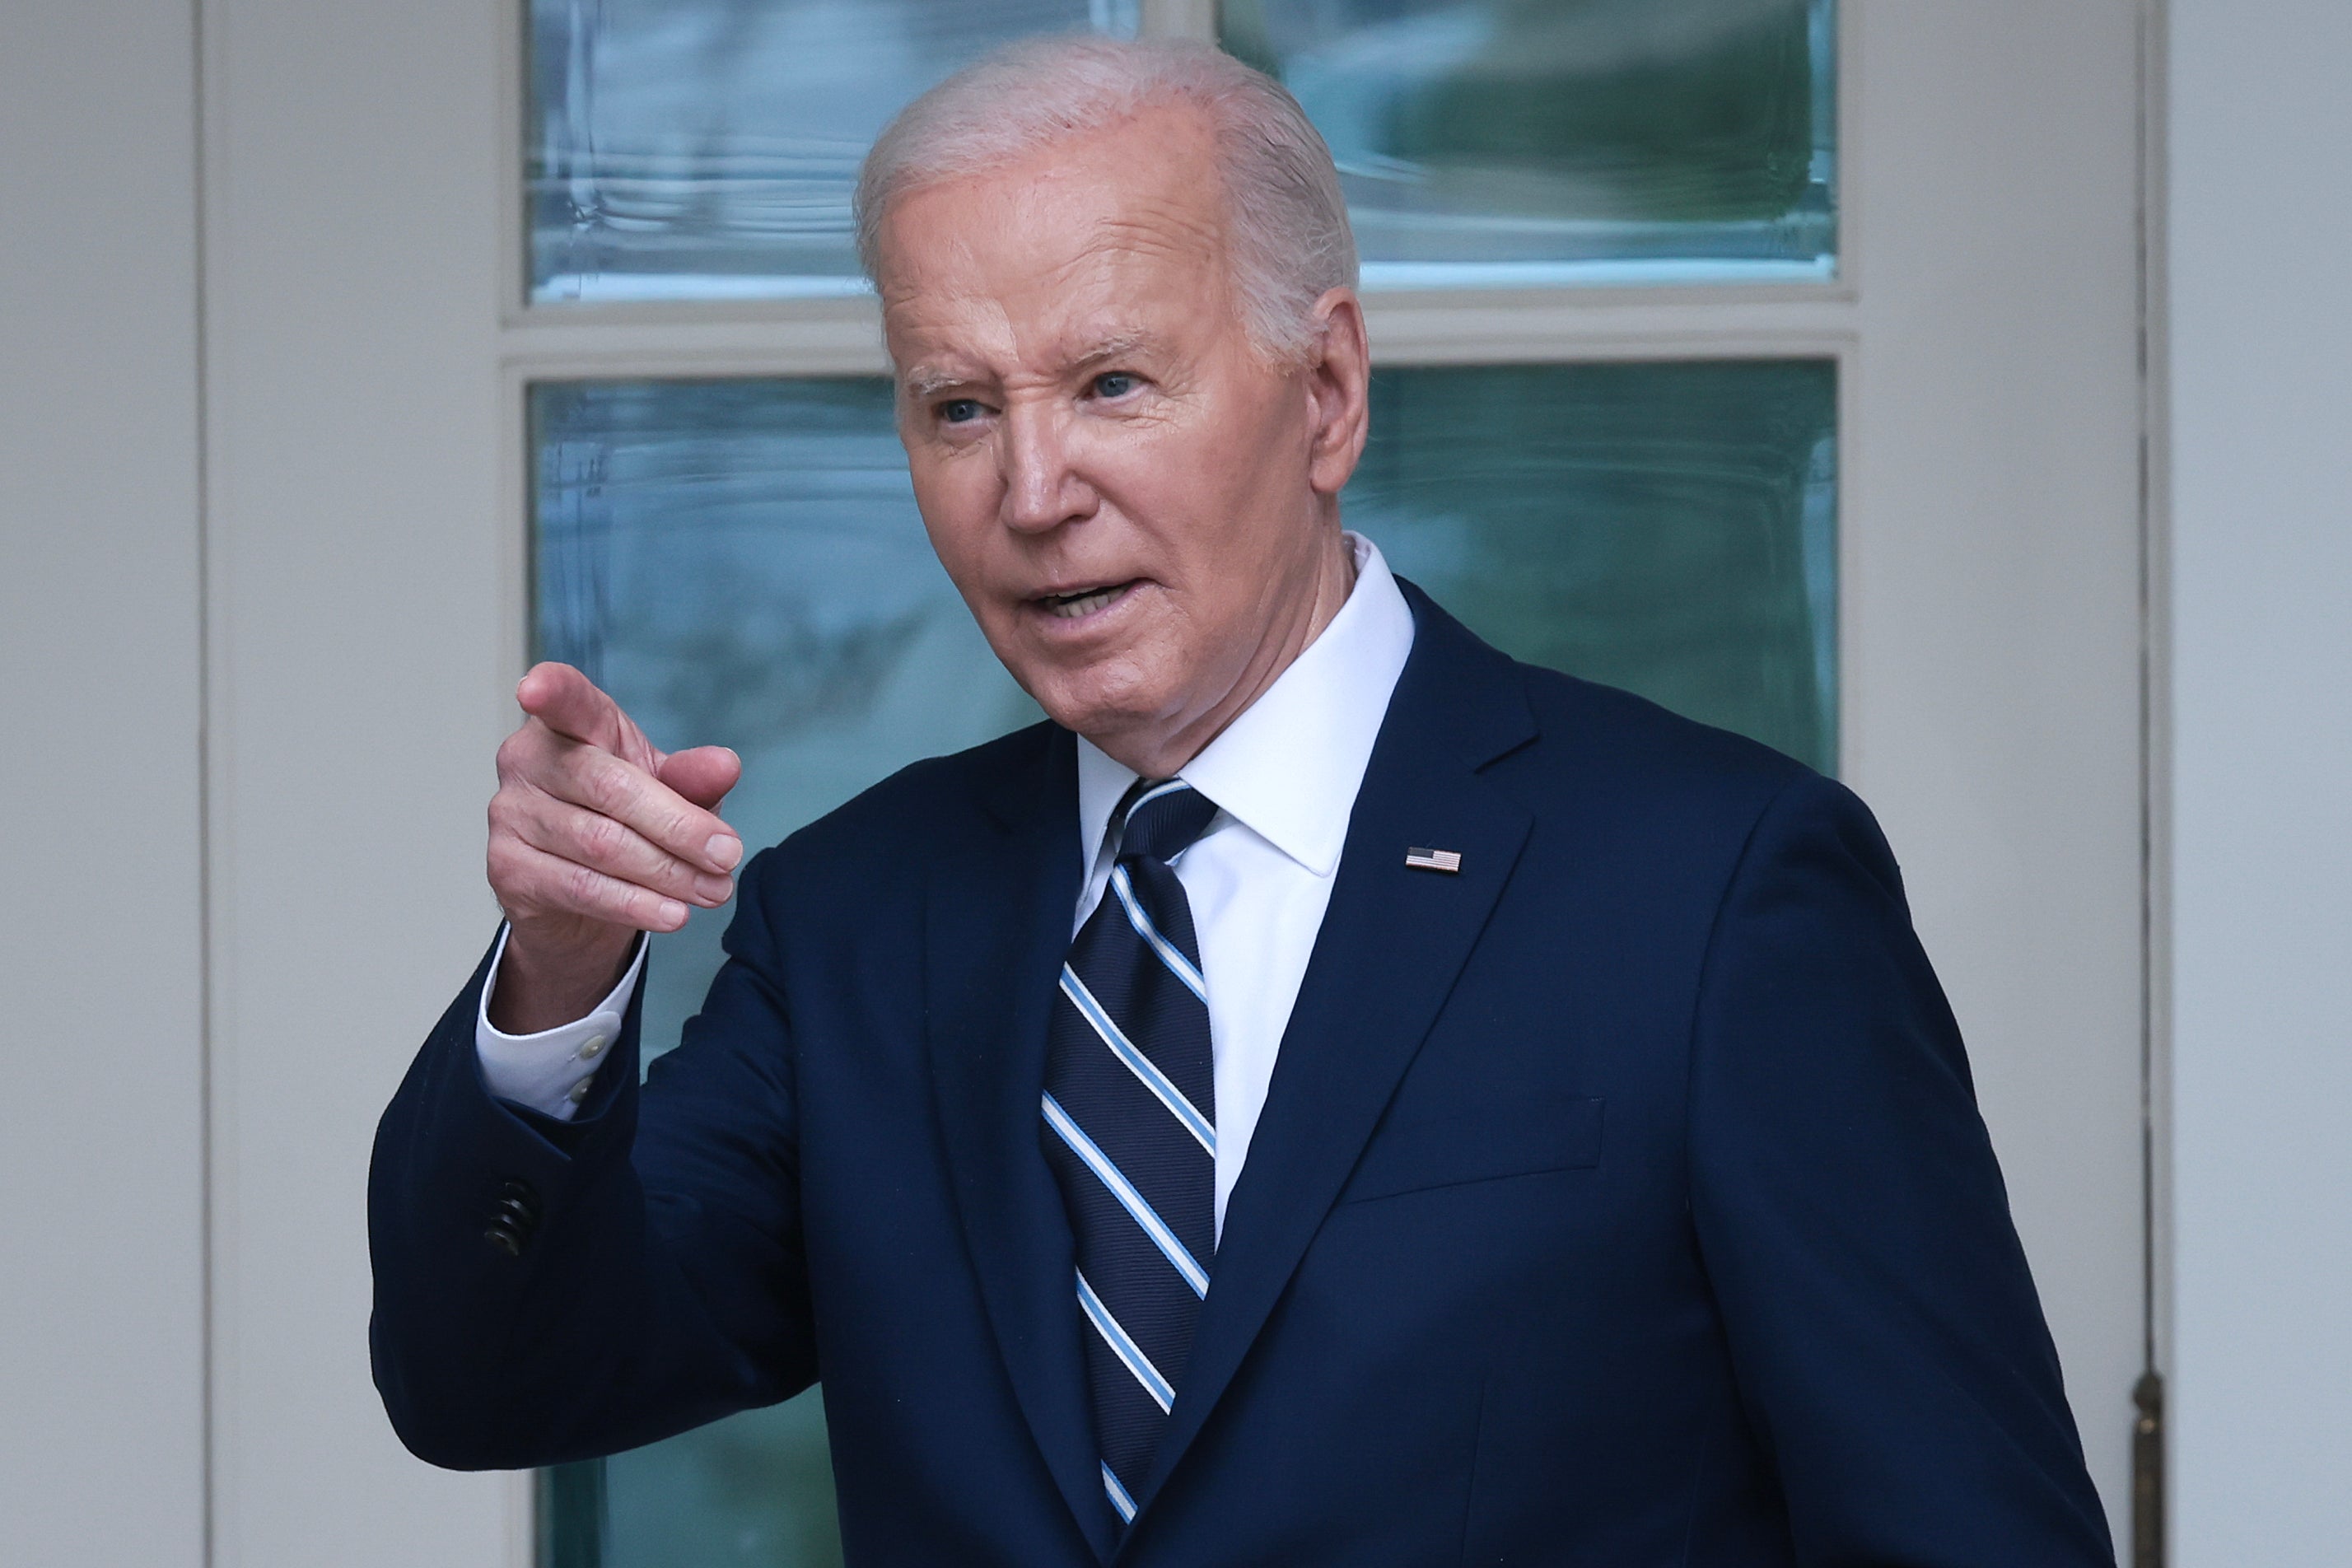 WASHINGTON, DC - MAY 14: Voters have said that inflation remains one of their top concerns. The lastest numbers should concern U.S. President Joe Biden. (Photo by Win McNamee/Getty Images)